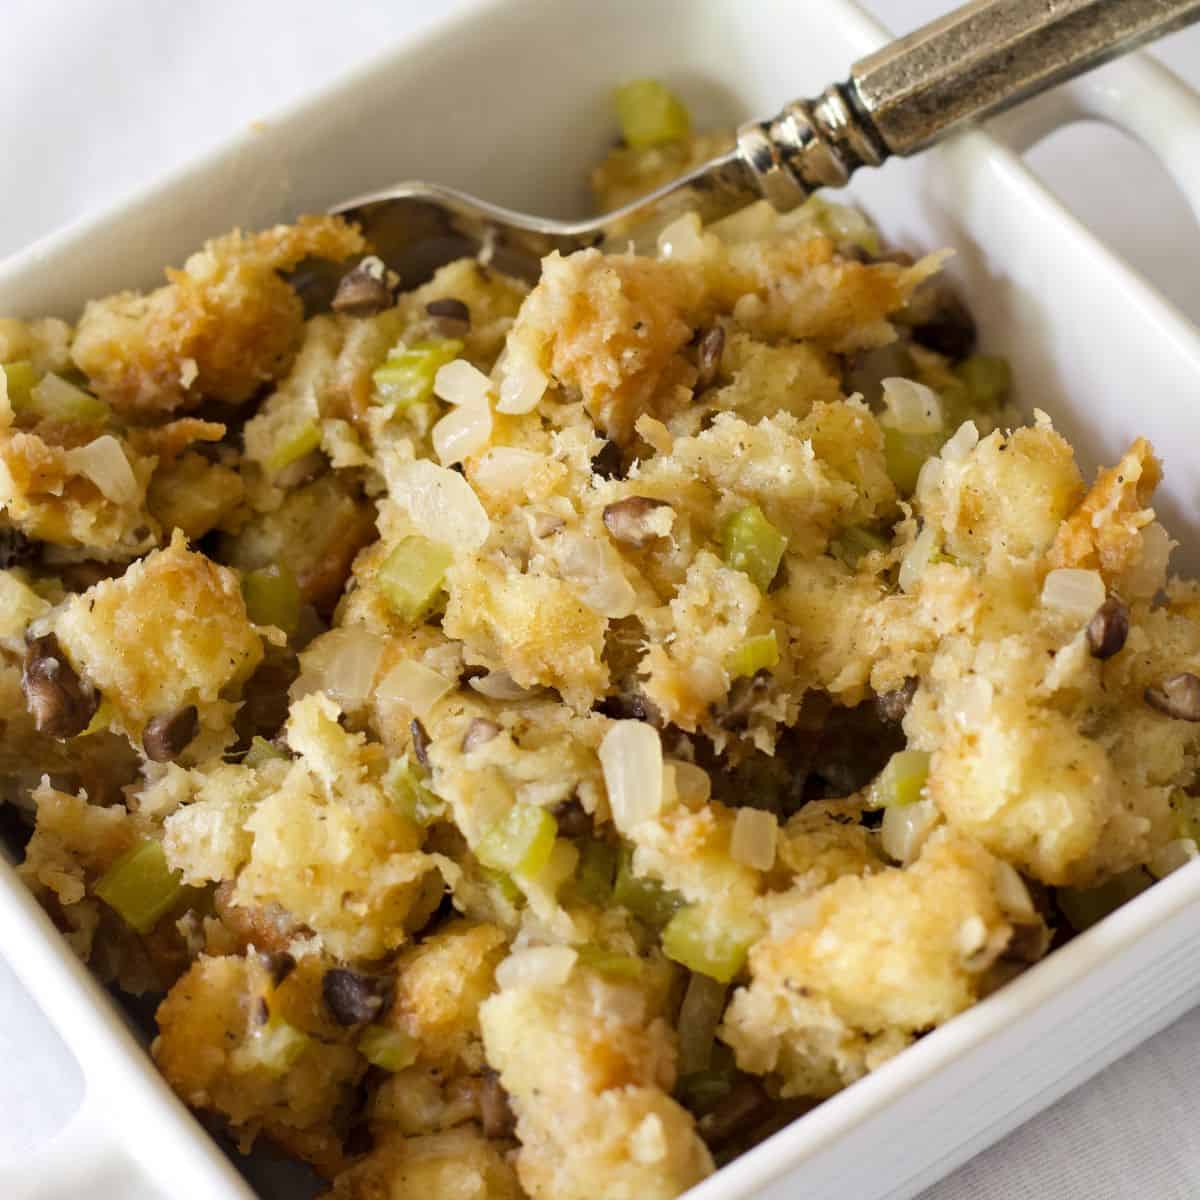 Homemade Stovetop Stuffing (Quick & Easy!)